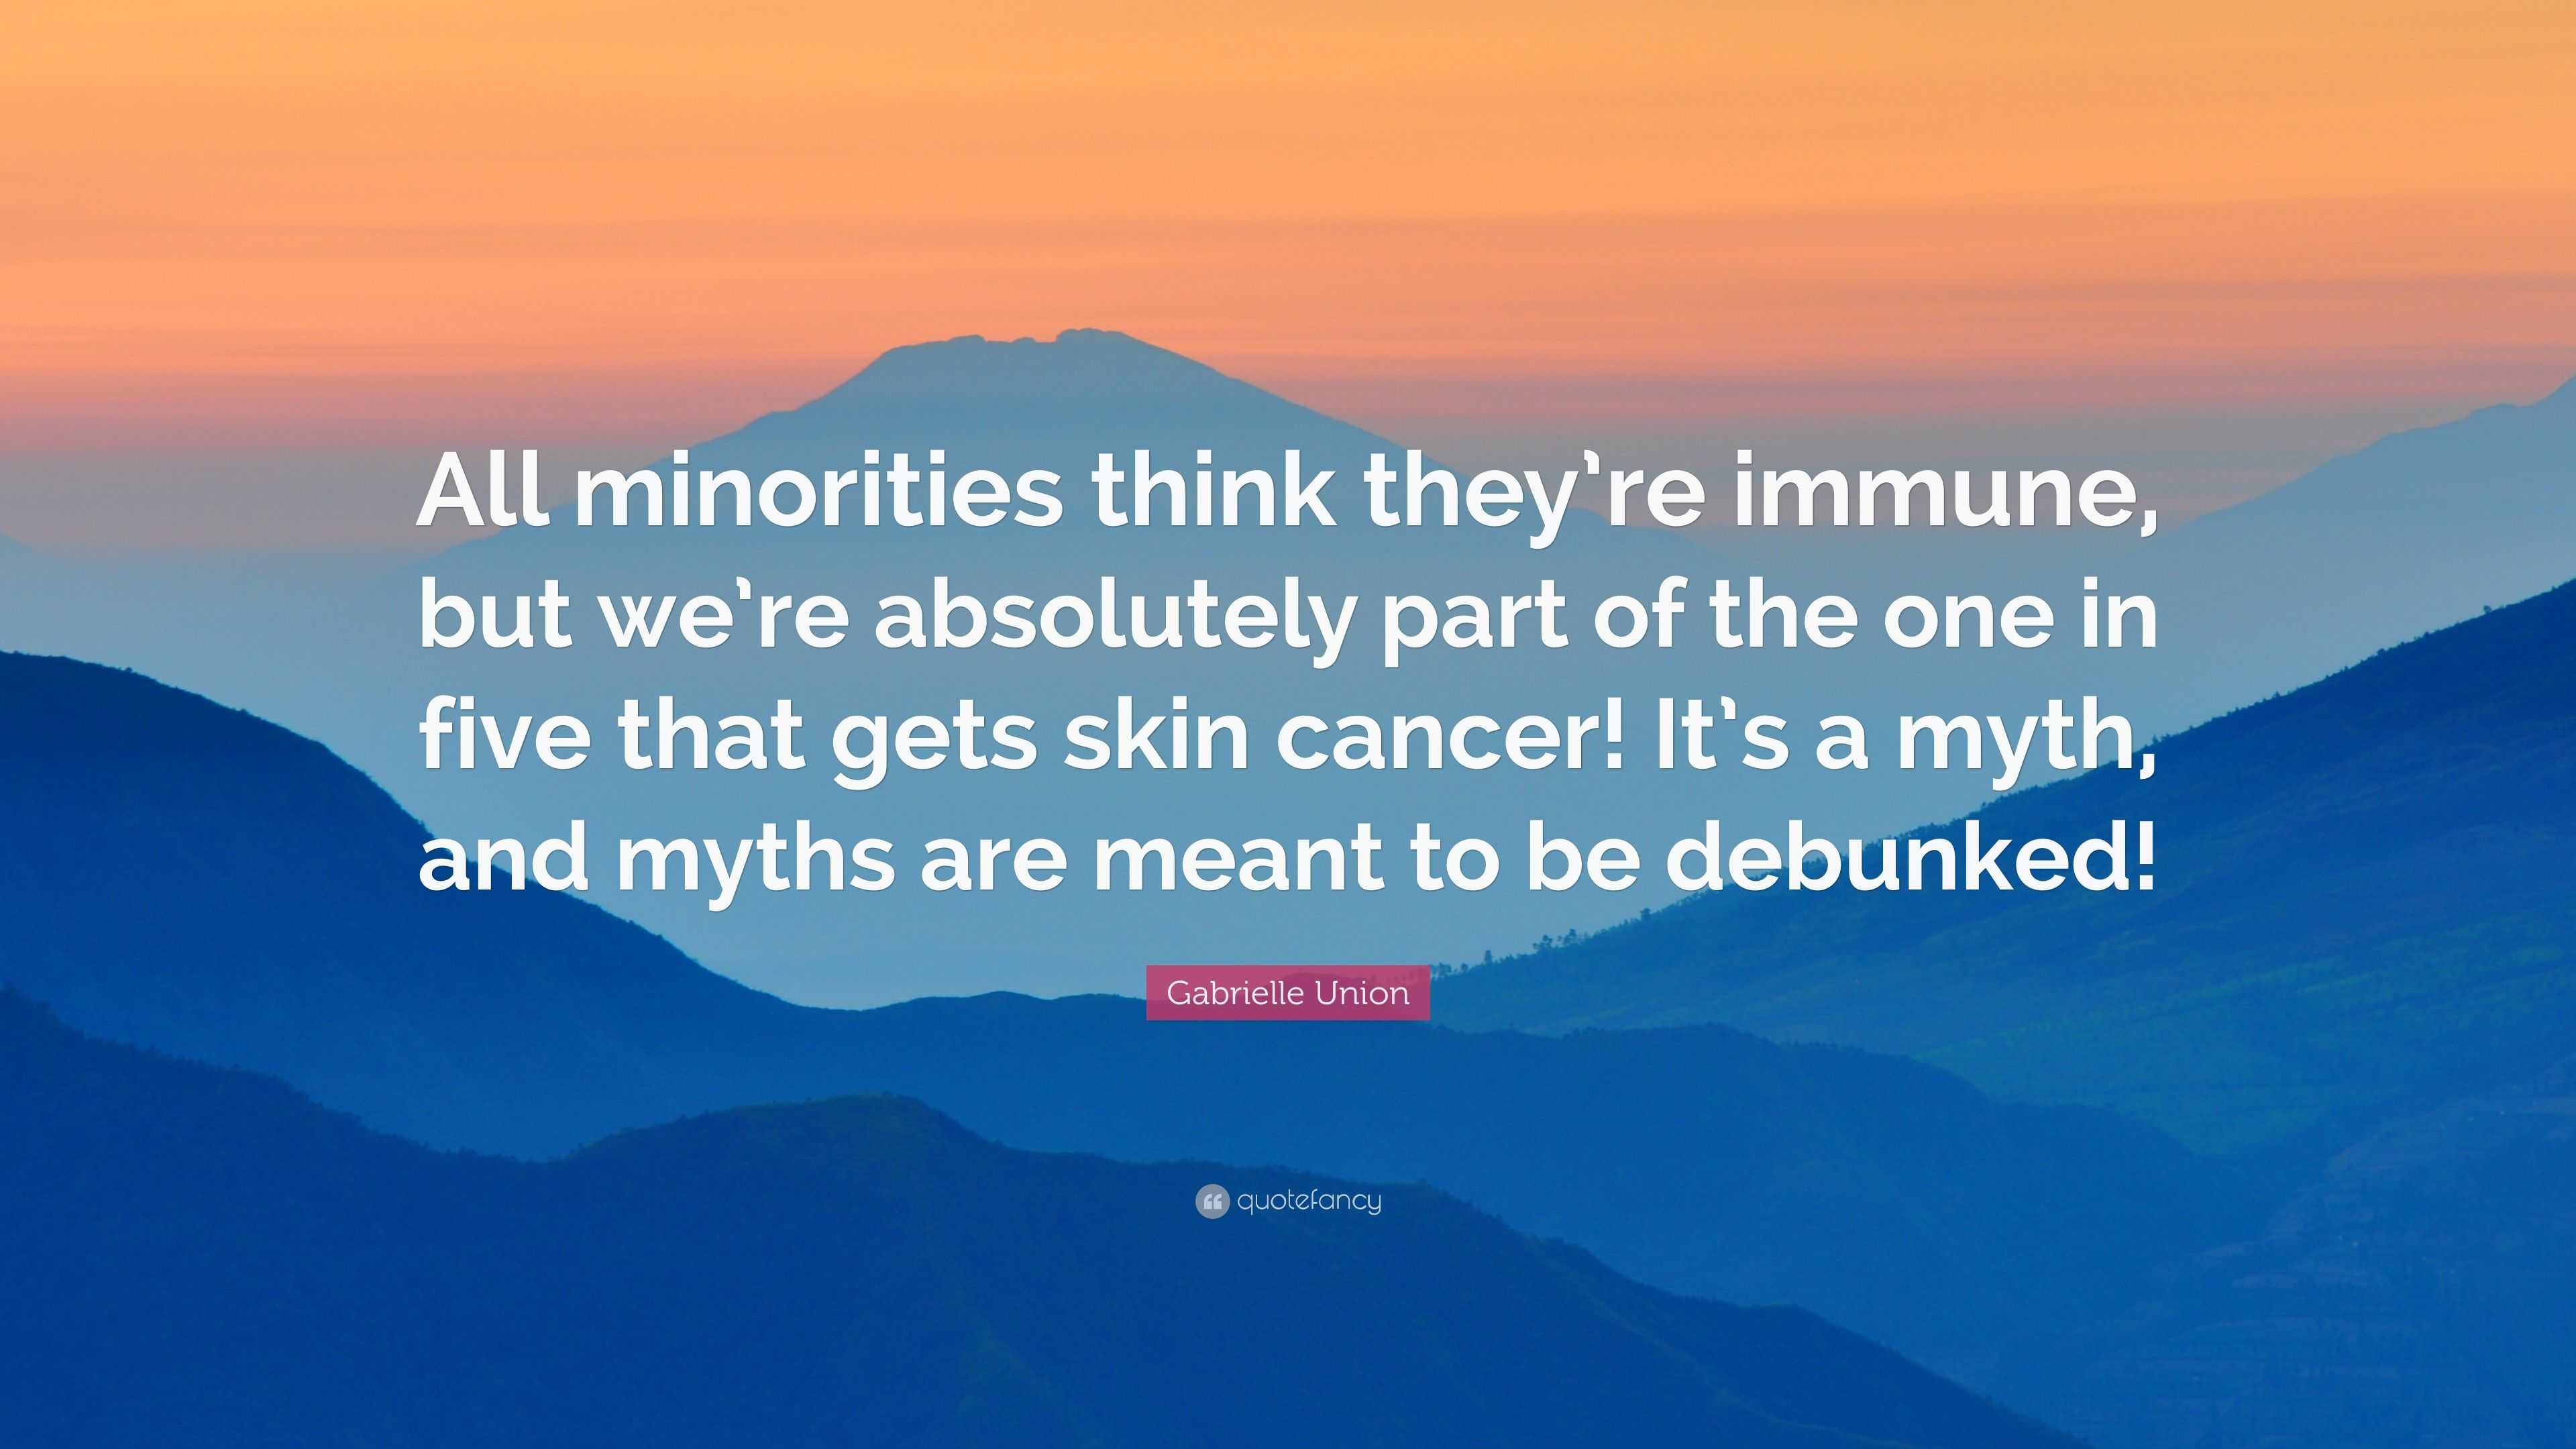 Gabrielle Union Quote: “All minorities think they’re immune, but we’re